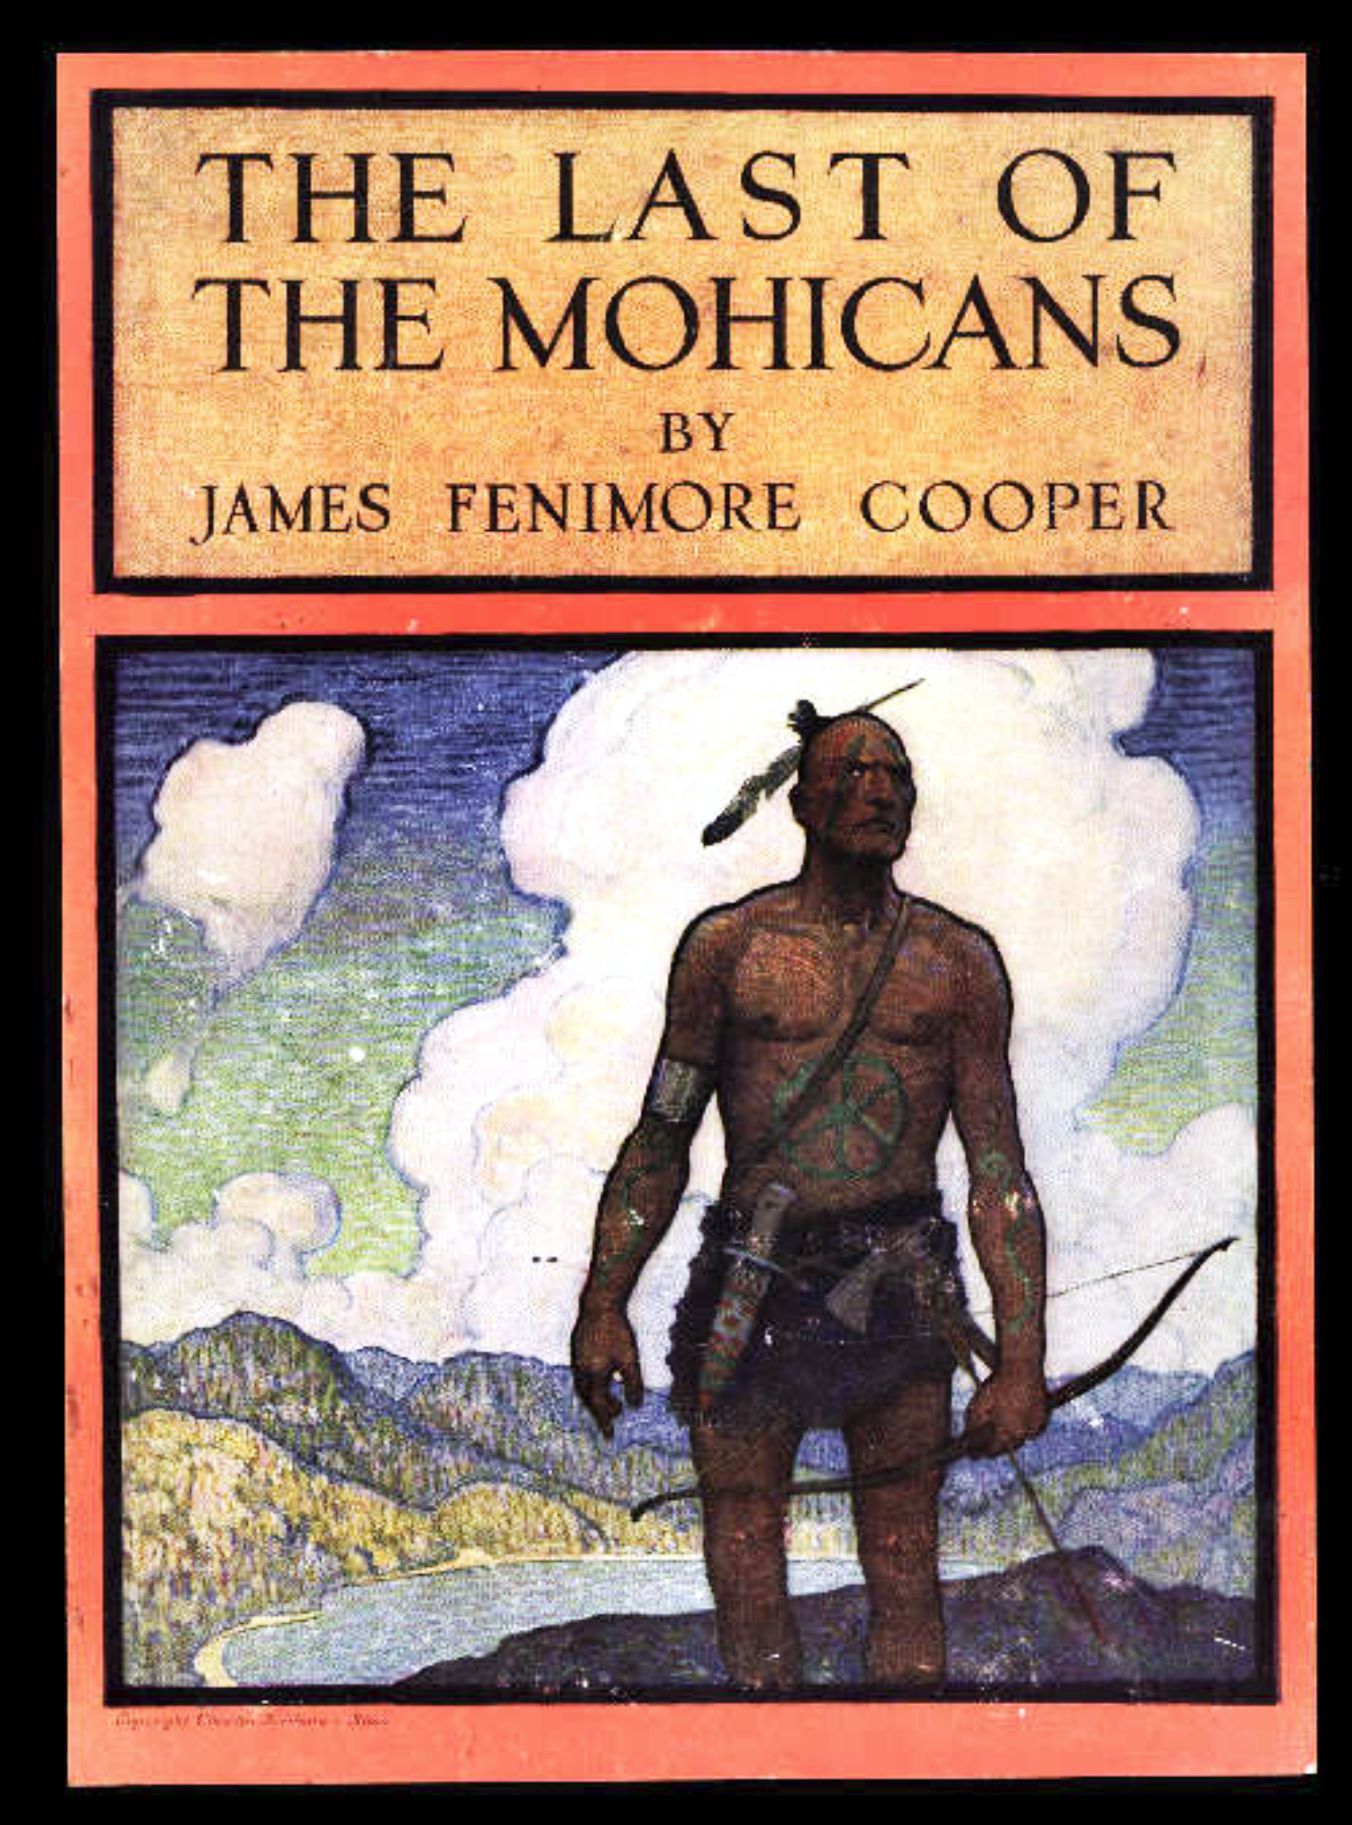 The last book i read was. The last of the Mohicans by James Fenimore Cooper. The last of the Mohicans book.